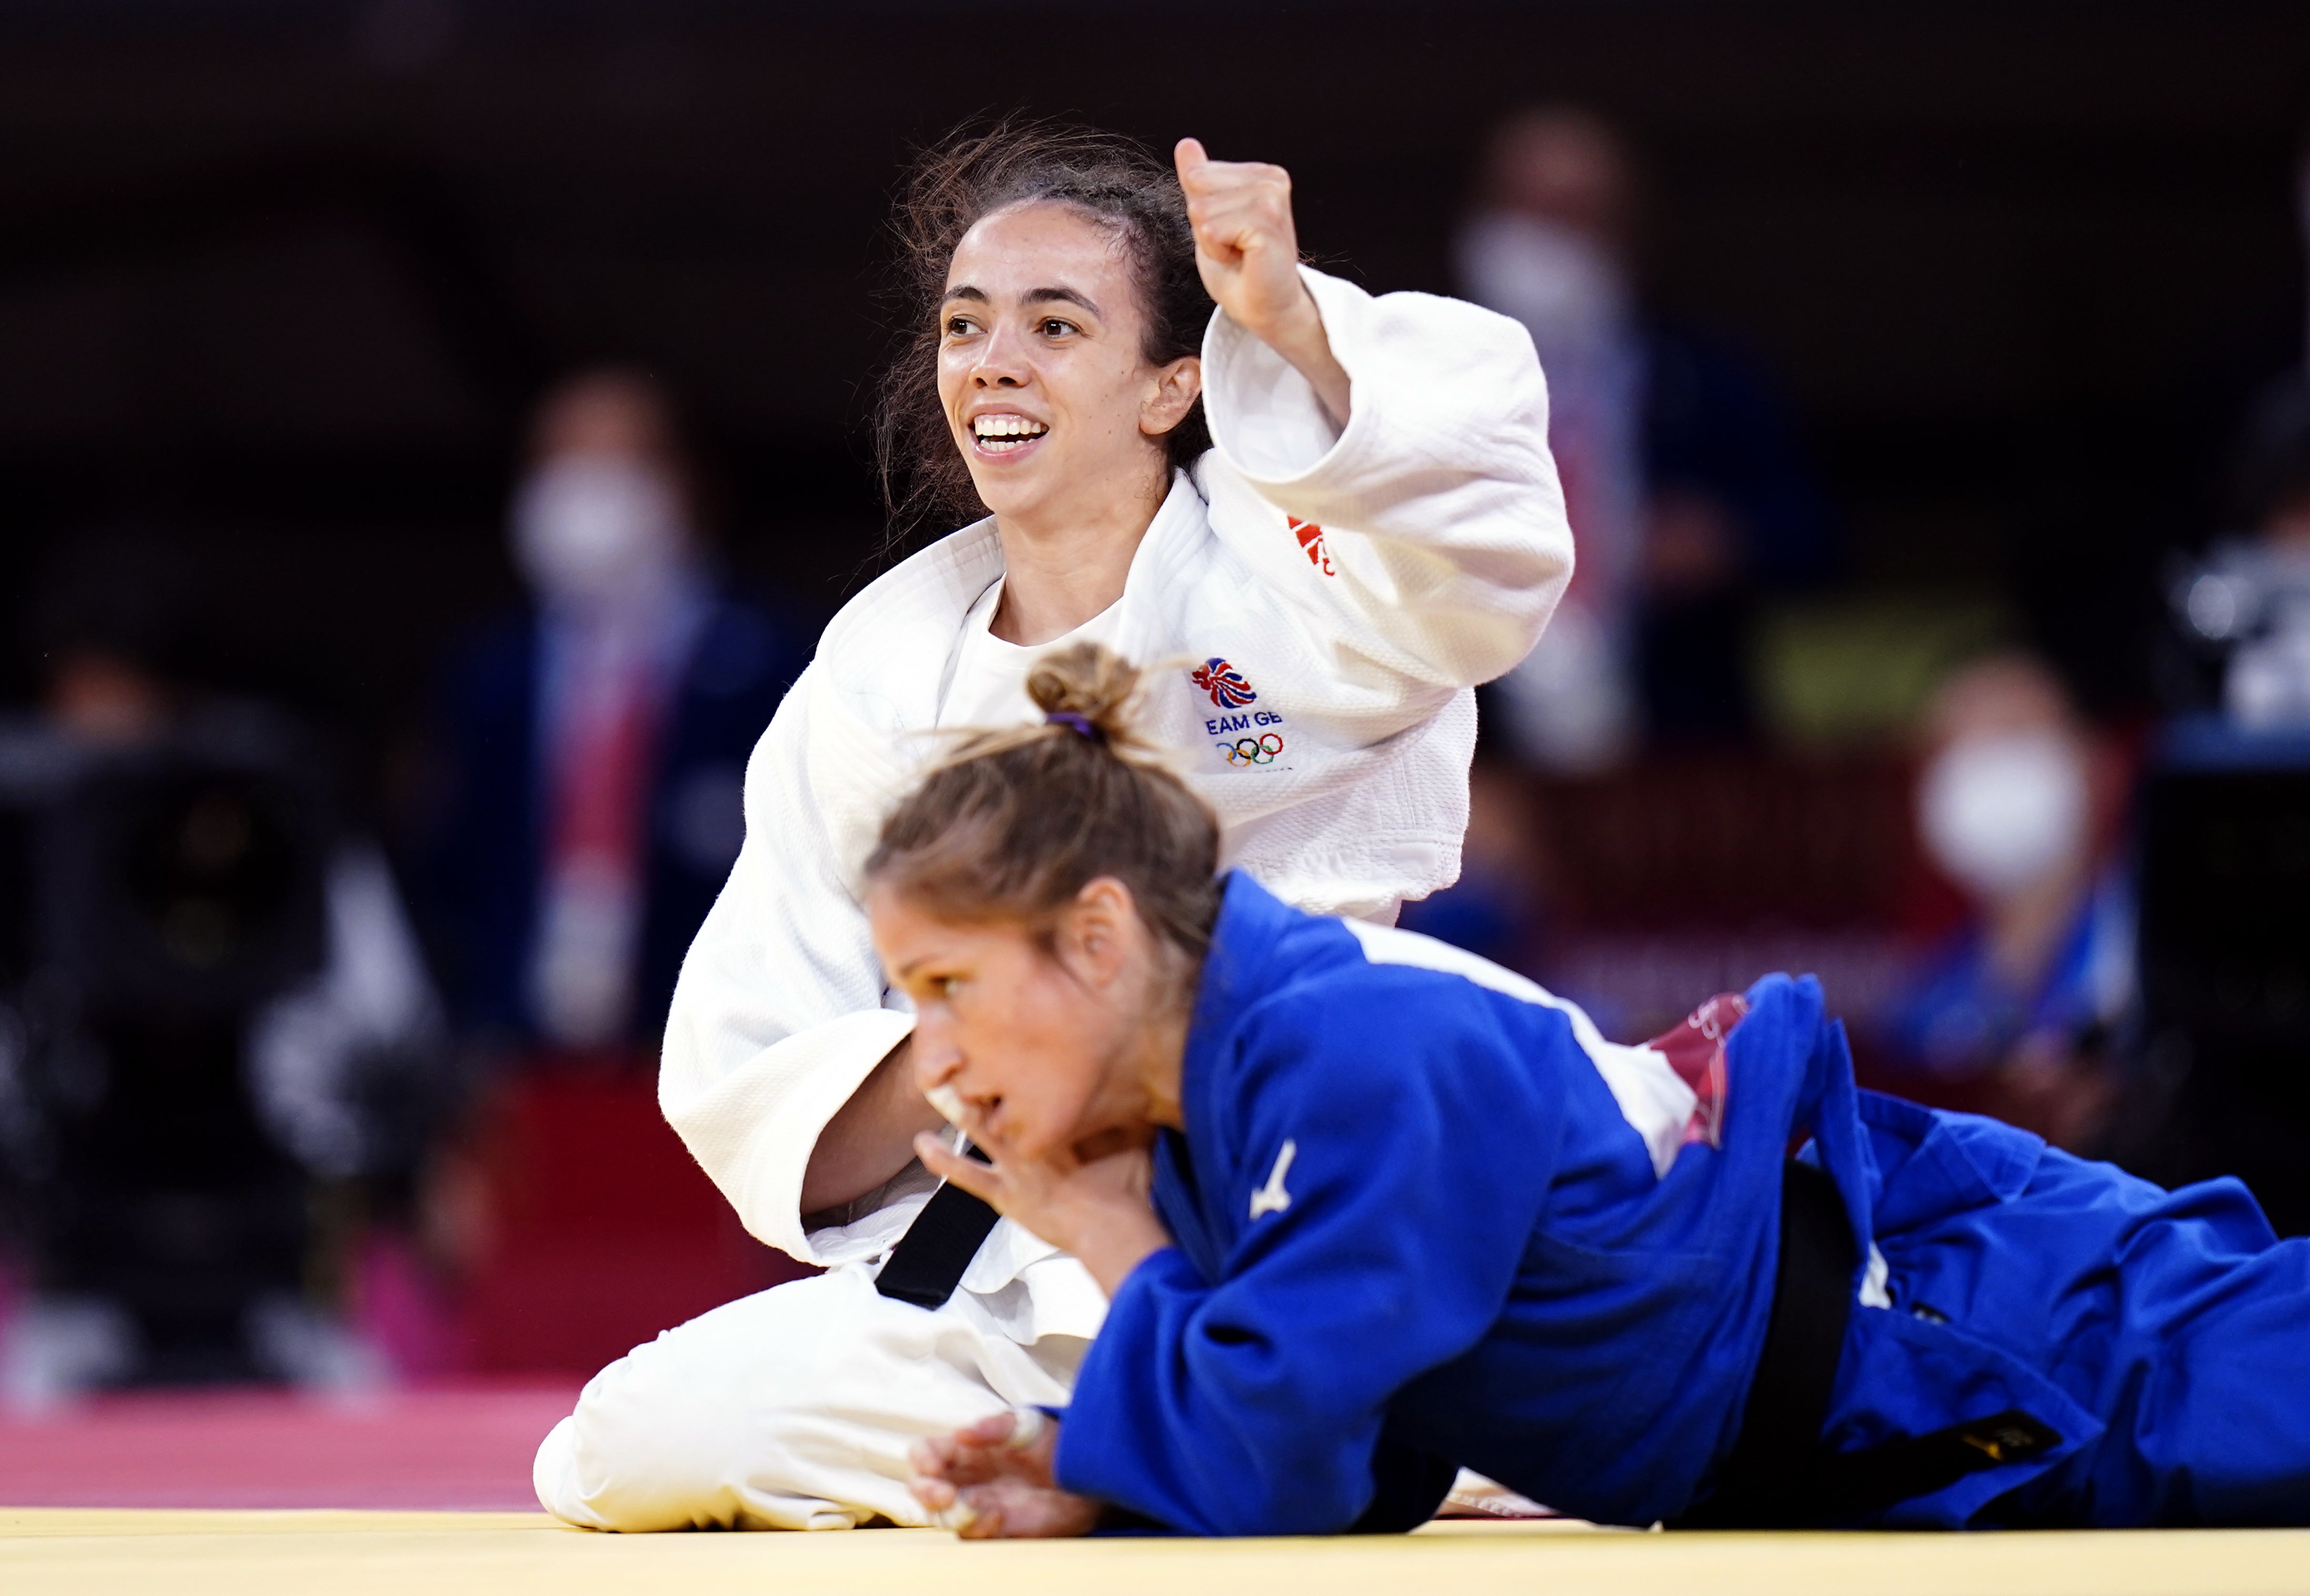 Chelsie Giles fought her way through the repechage to claim a bronze medal at the Tokyo Olympics (Danny Lawson/PA)